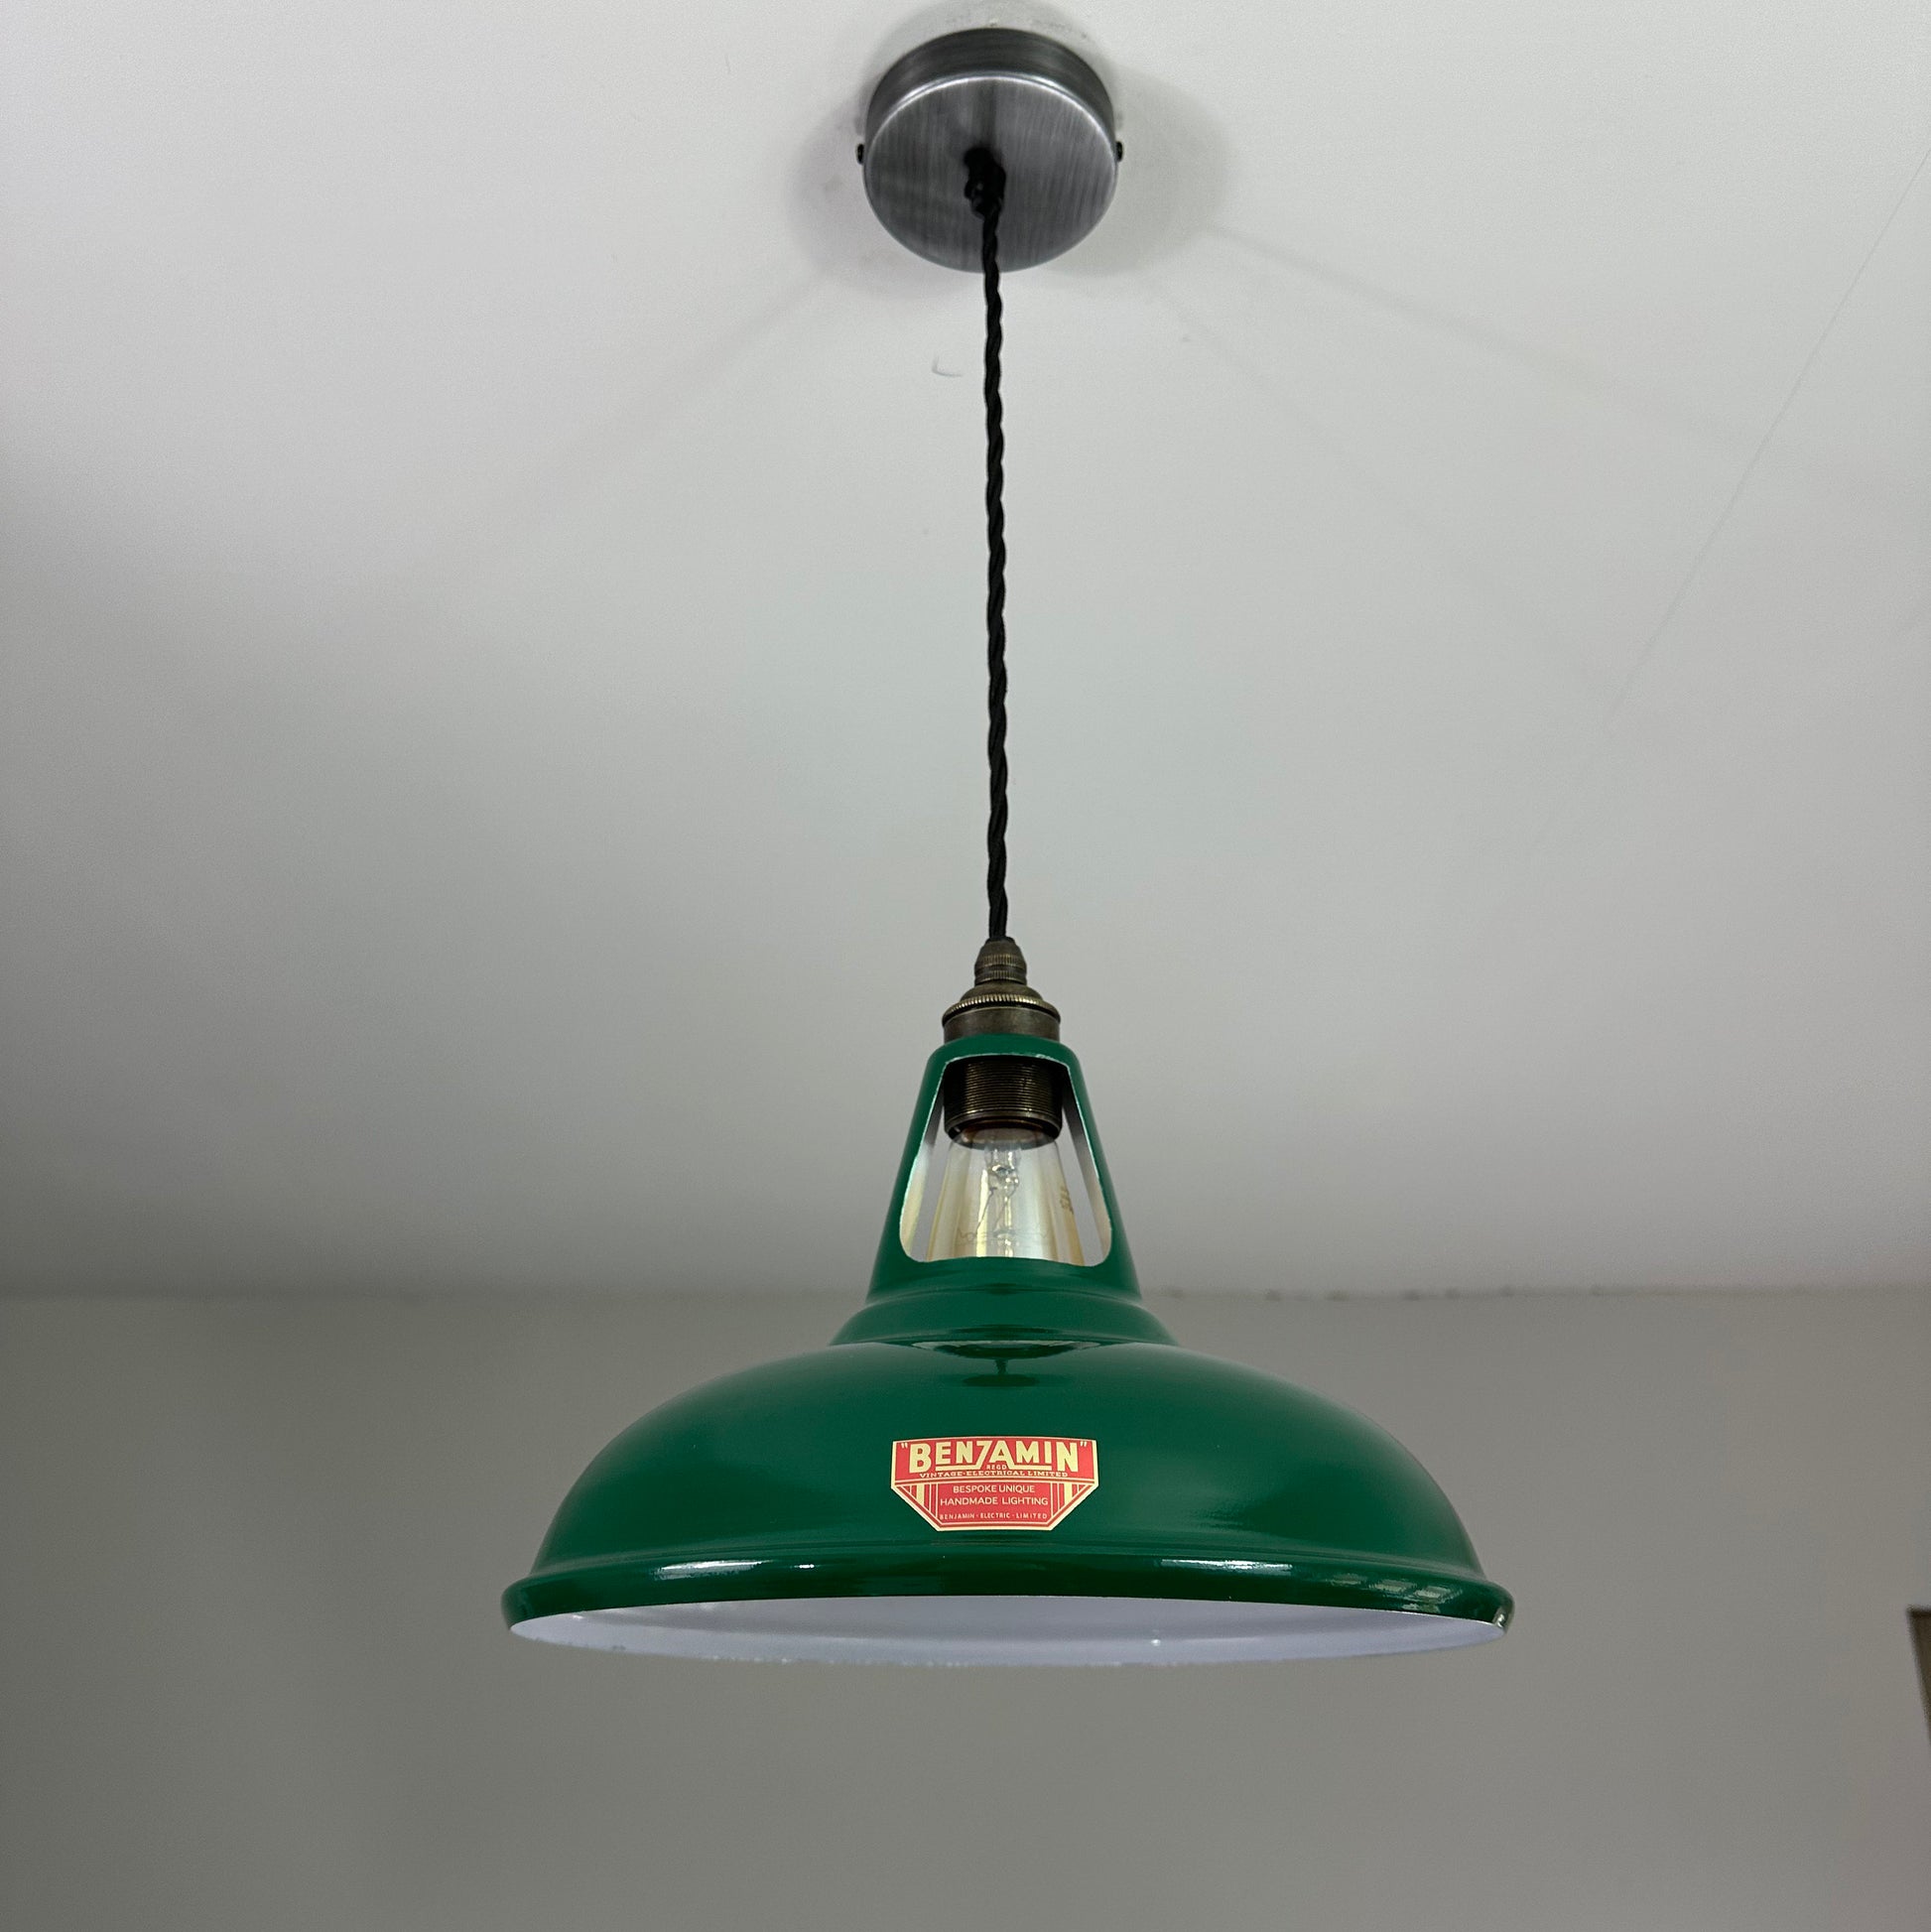 Cawston ~ Racing Green Solid Shade Red Label Slotted Design Pendant Light | Ceiling Dining Room | Kitchen Table | Vintage Bulb | 11 Inch